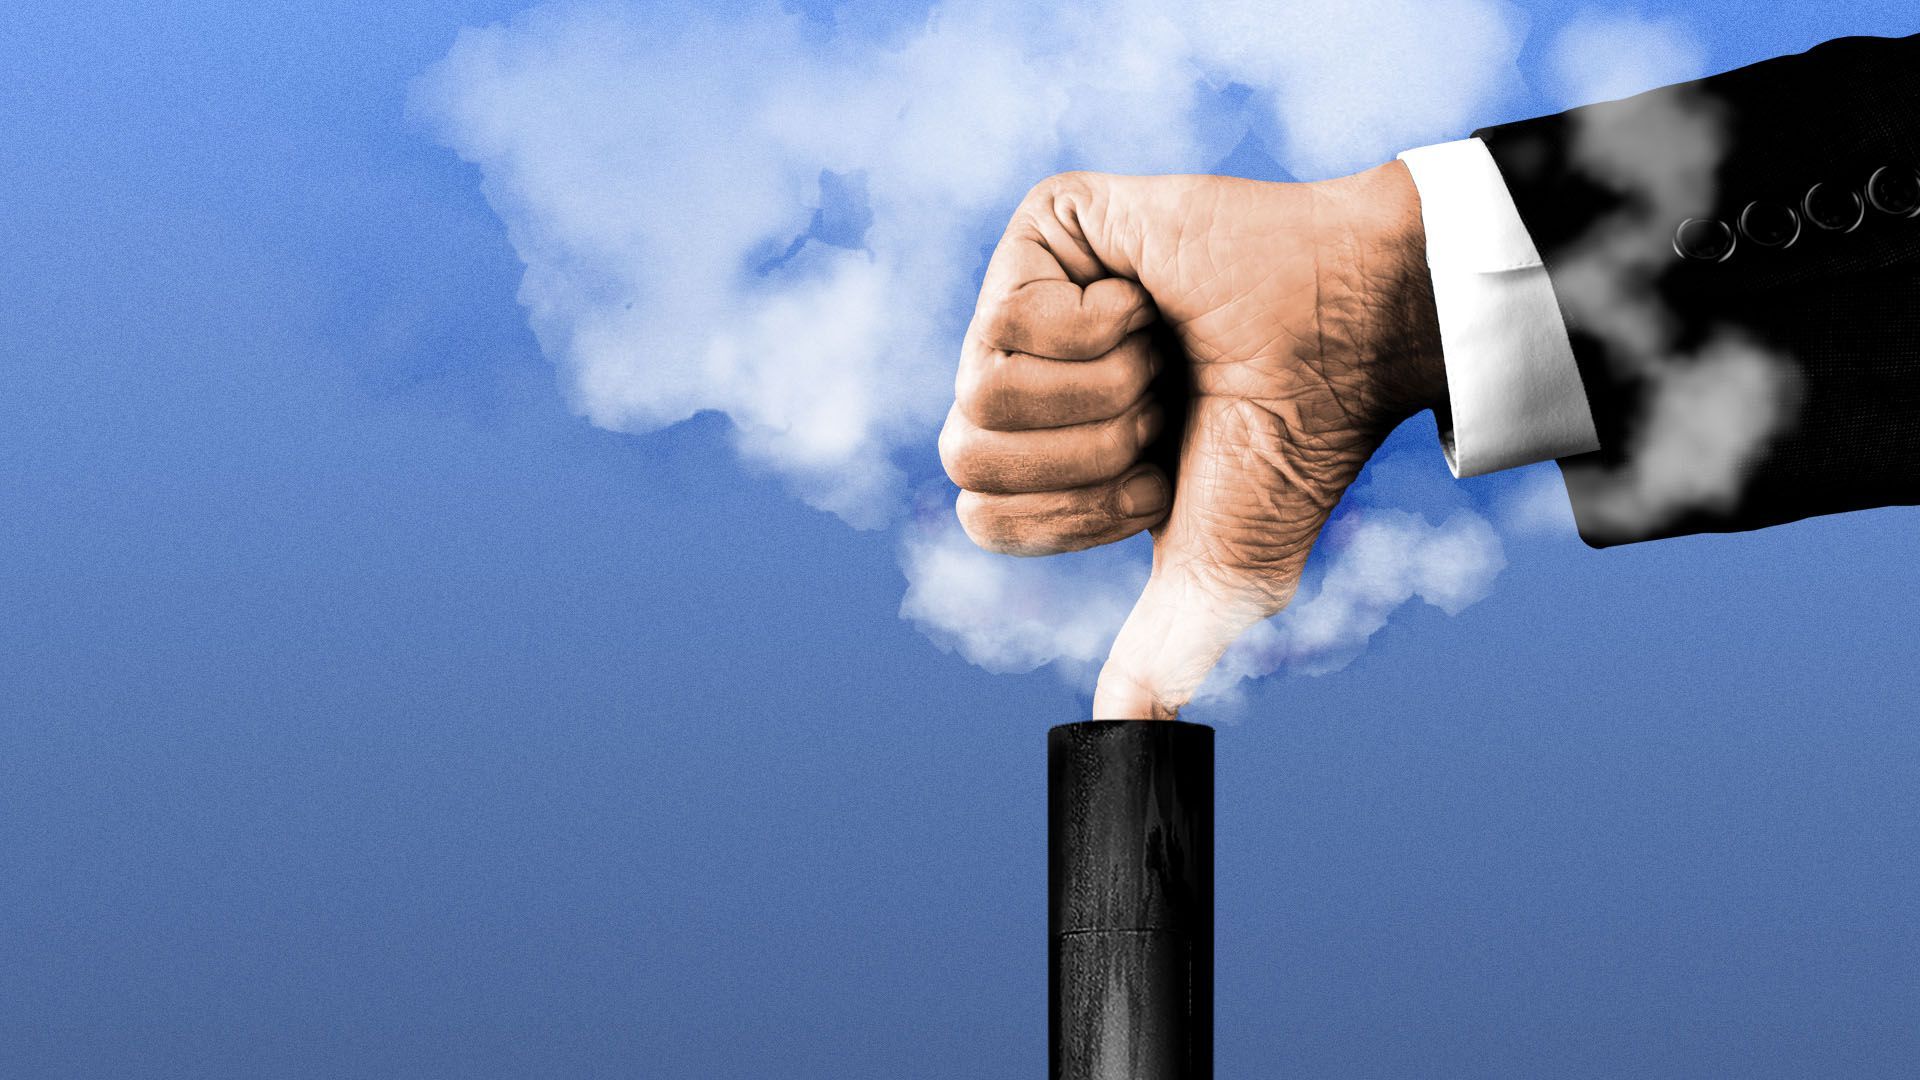 Illustration of a hand in a suit plugging up a smokestack